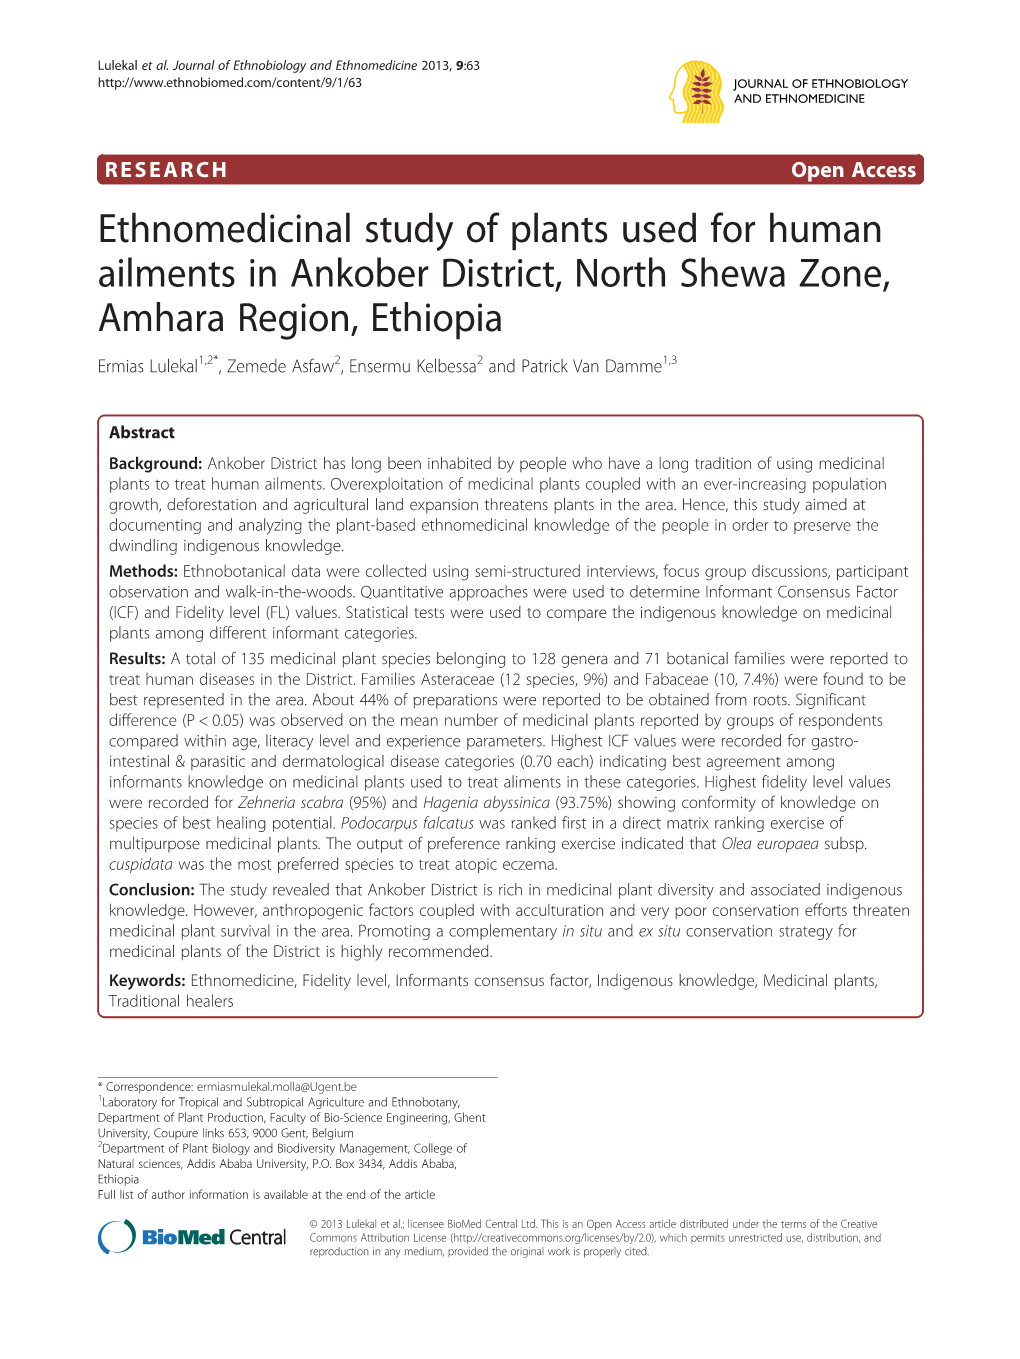 Ethnomedicinal Study of Plants Used for Human Ailments in Ankober District, North Shewa Zone, Amhara Region, Ethiopia